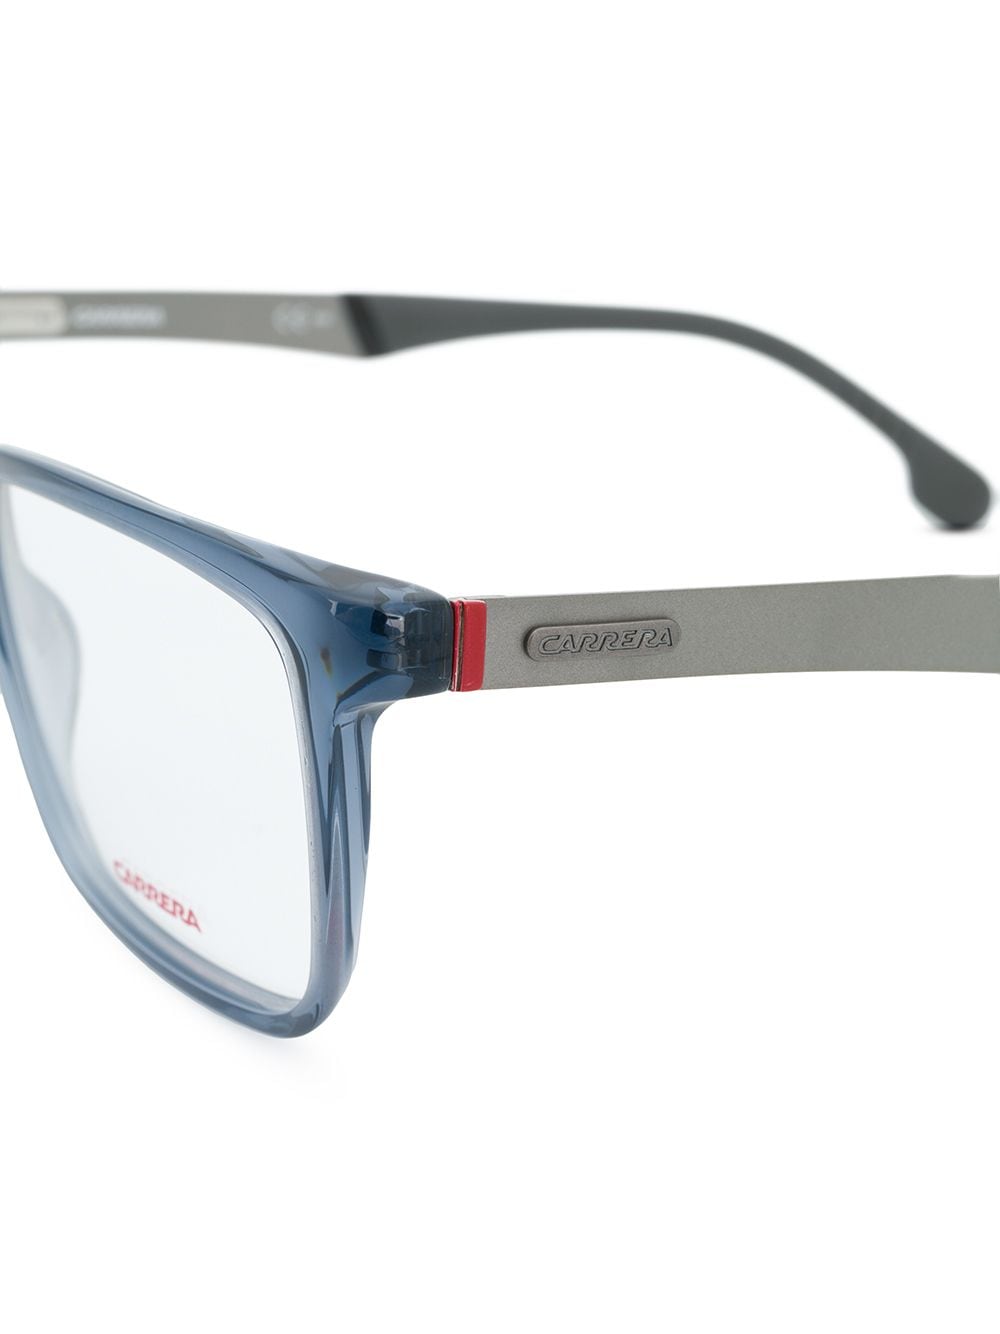 Shop Carrera square frame glasses with Express Delivery - FARFETCH